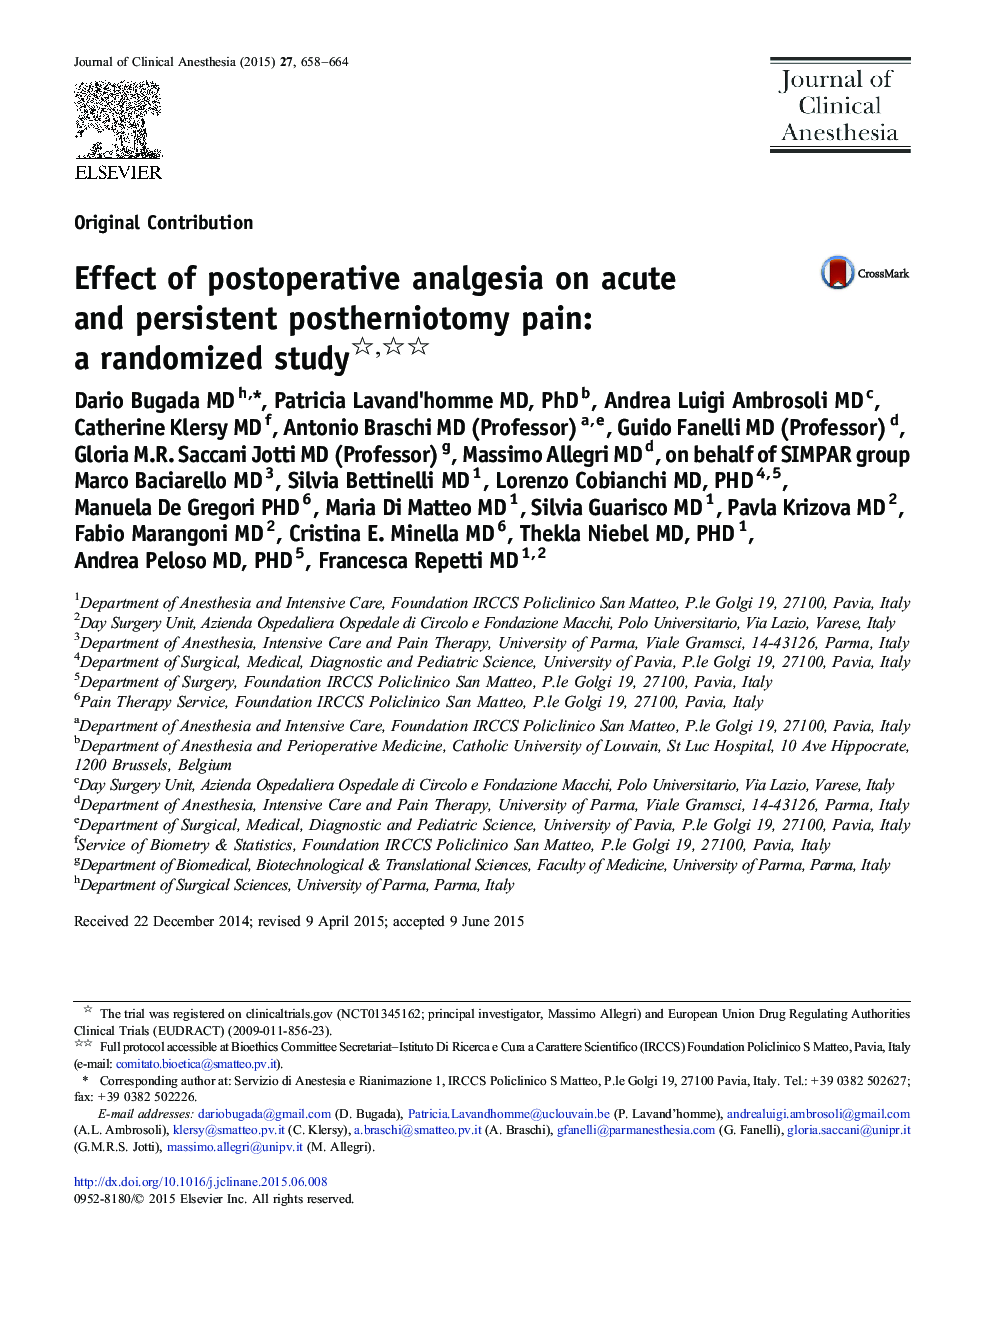 Effect of postoperative analgesia on acute and persistent postherniotomy pain: a randomized study 